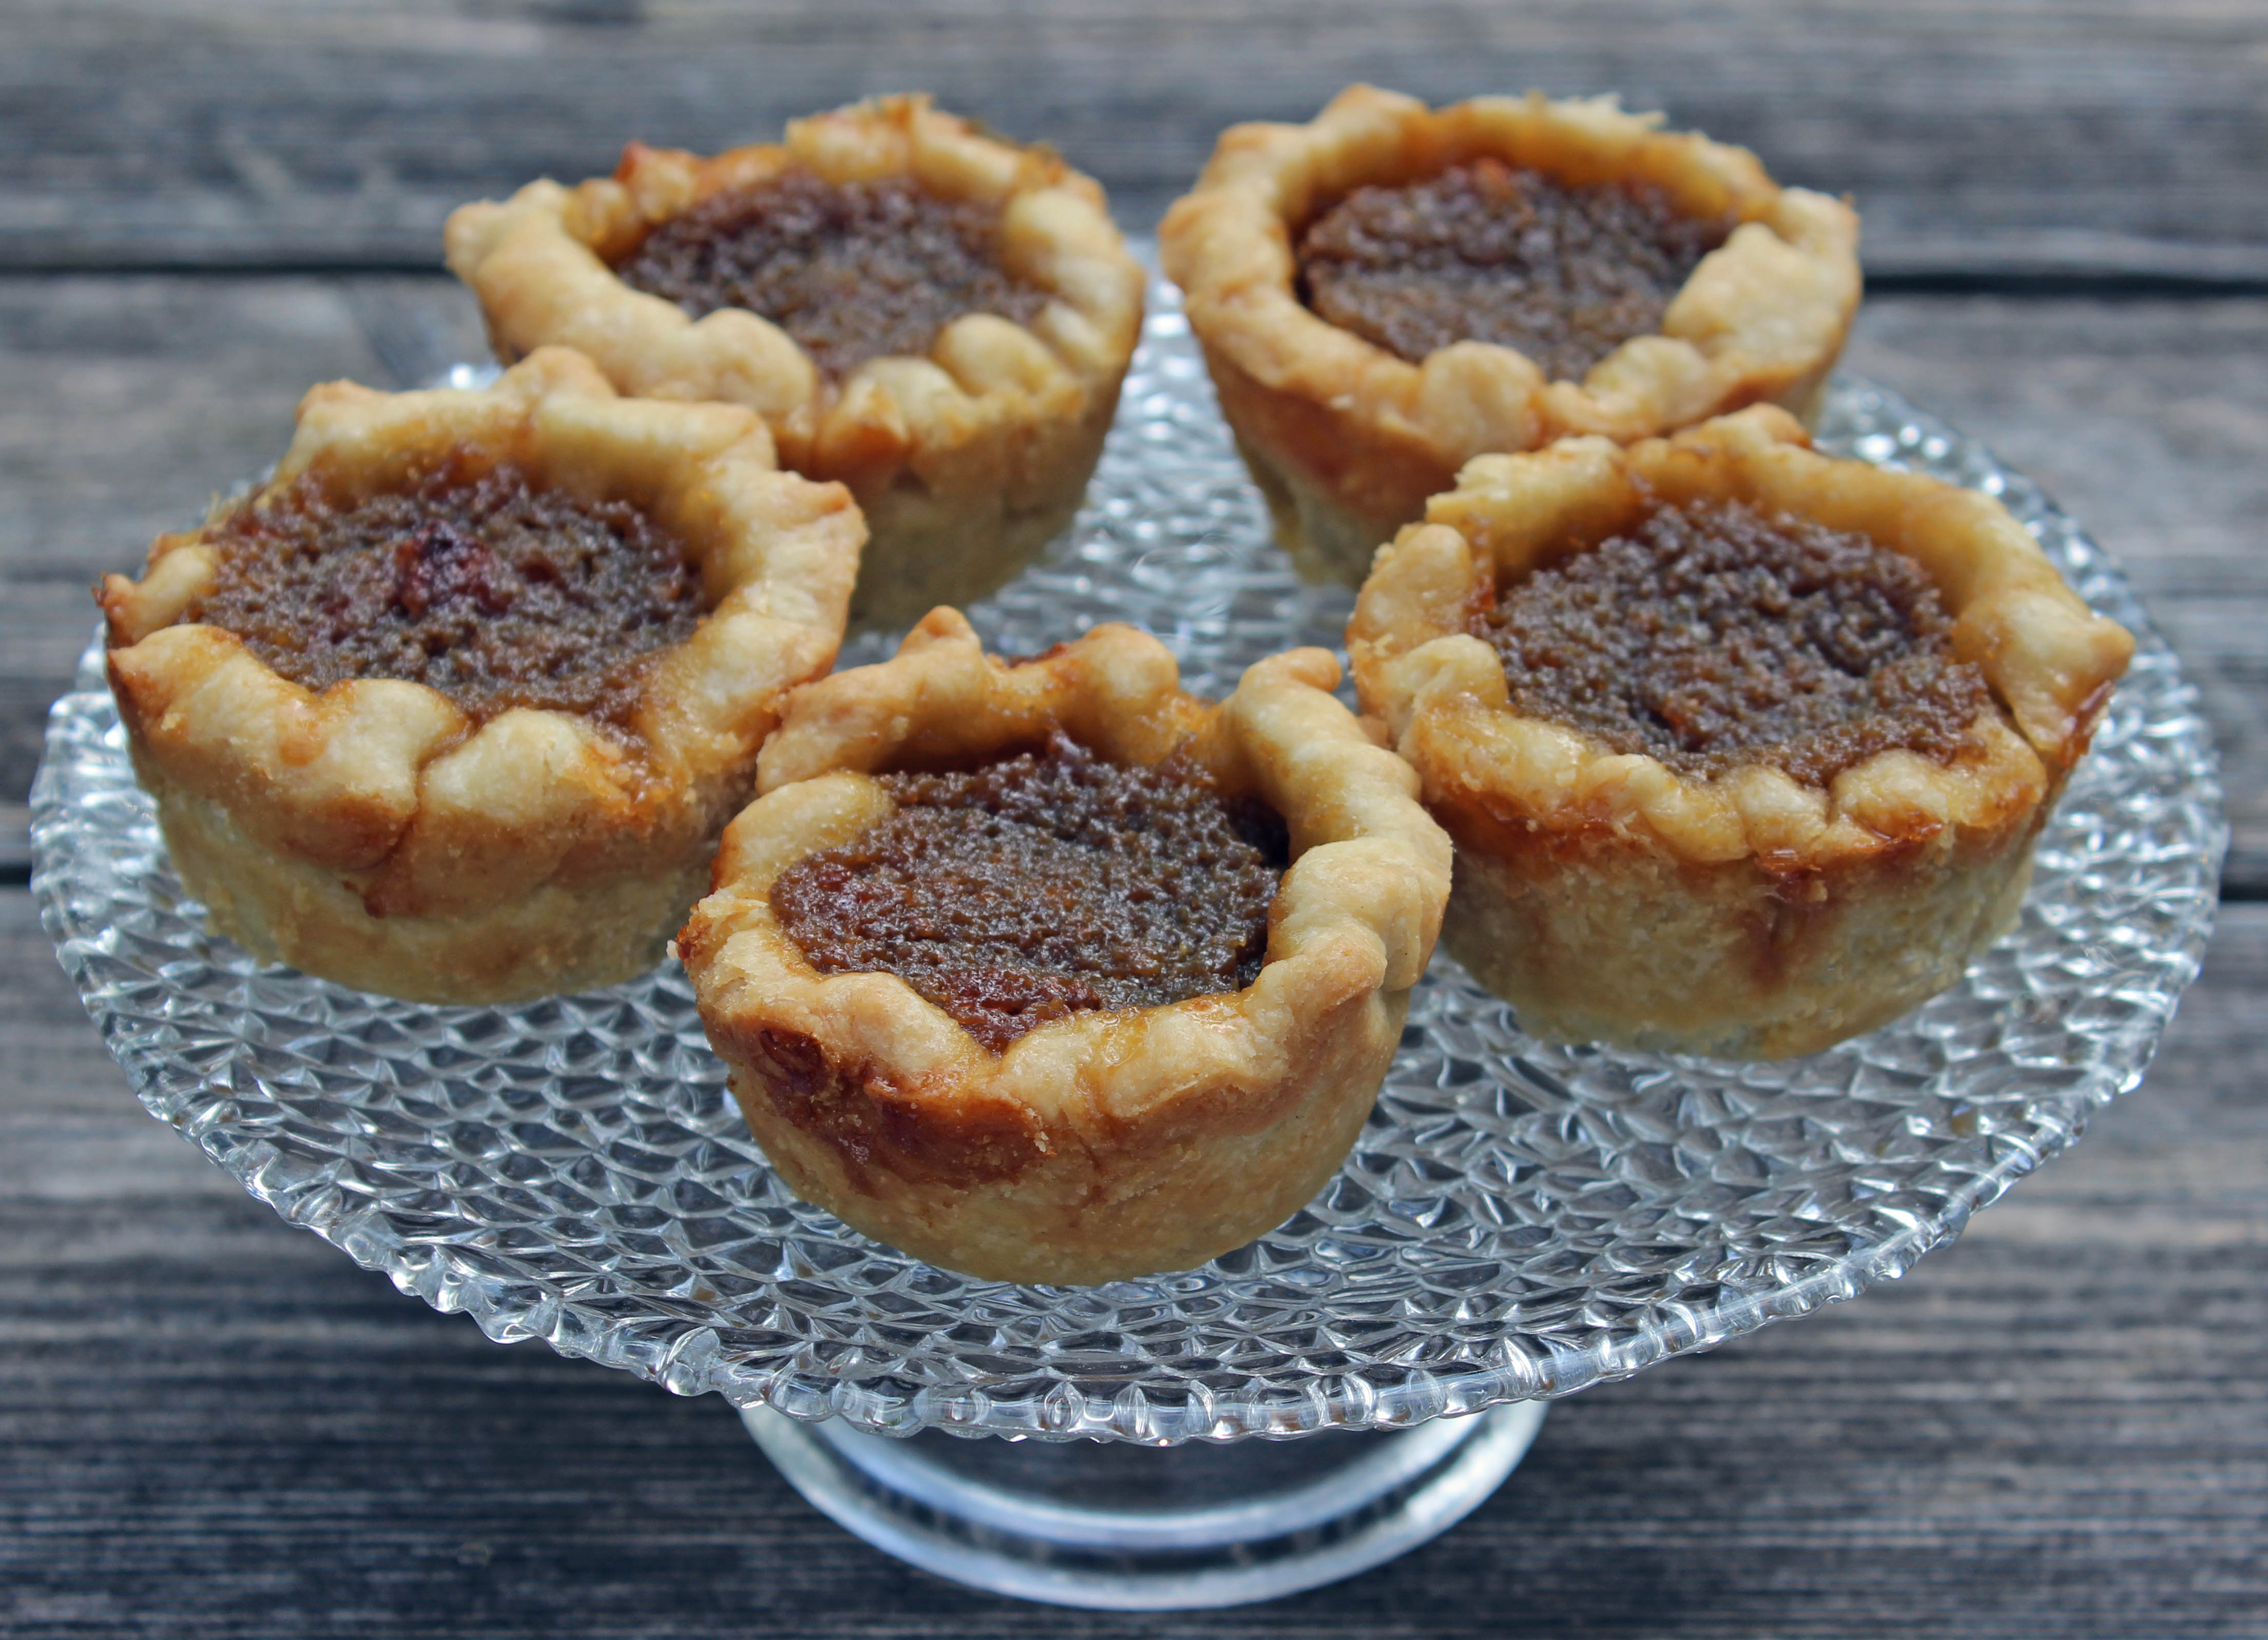 What is an easy recipe for butter tarts?